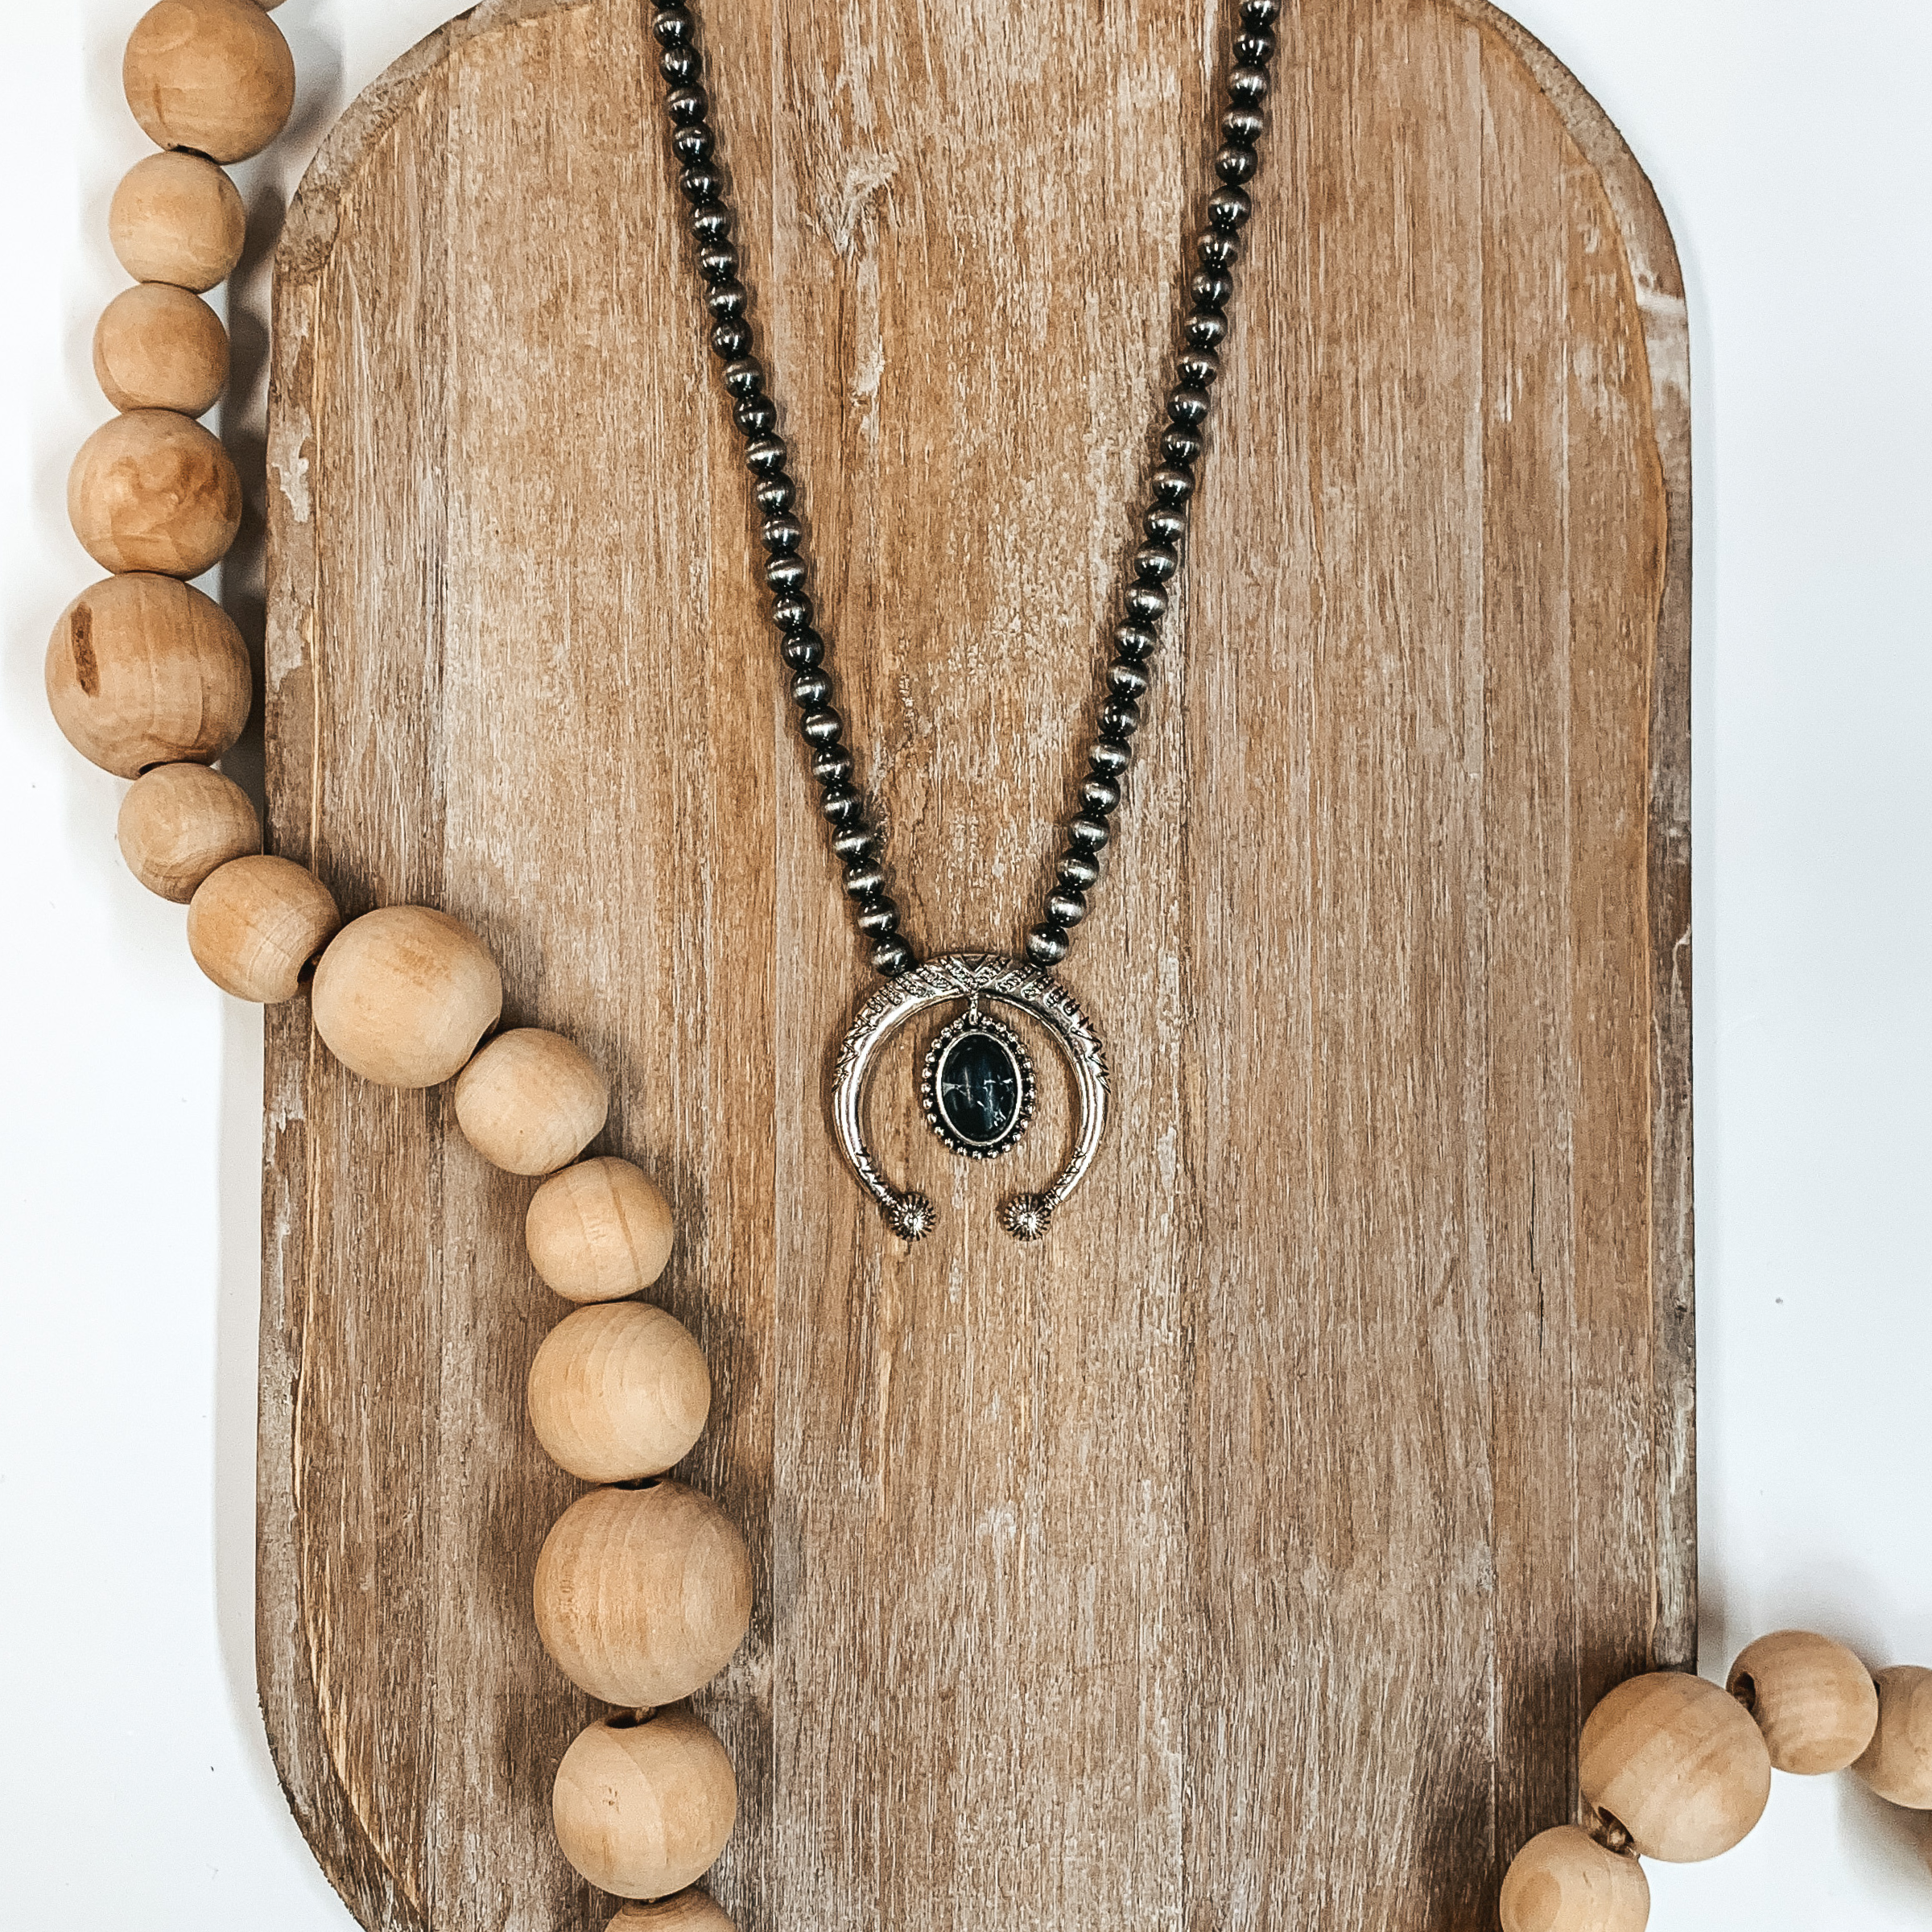 Squash Blossom with Black Oval Pendant and Navajo Inspired Pearl Necklace - Giddy Up Glamour Boutique